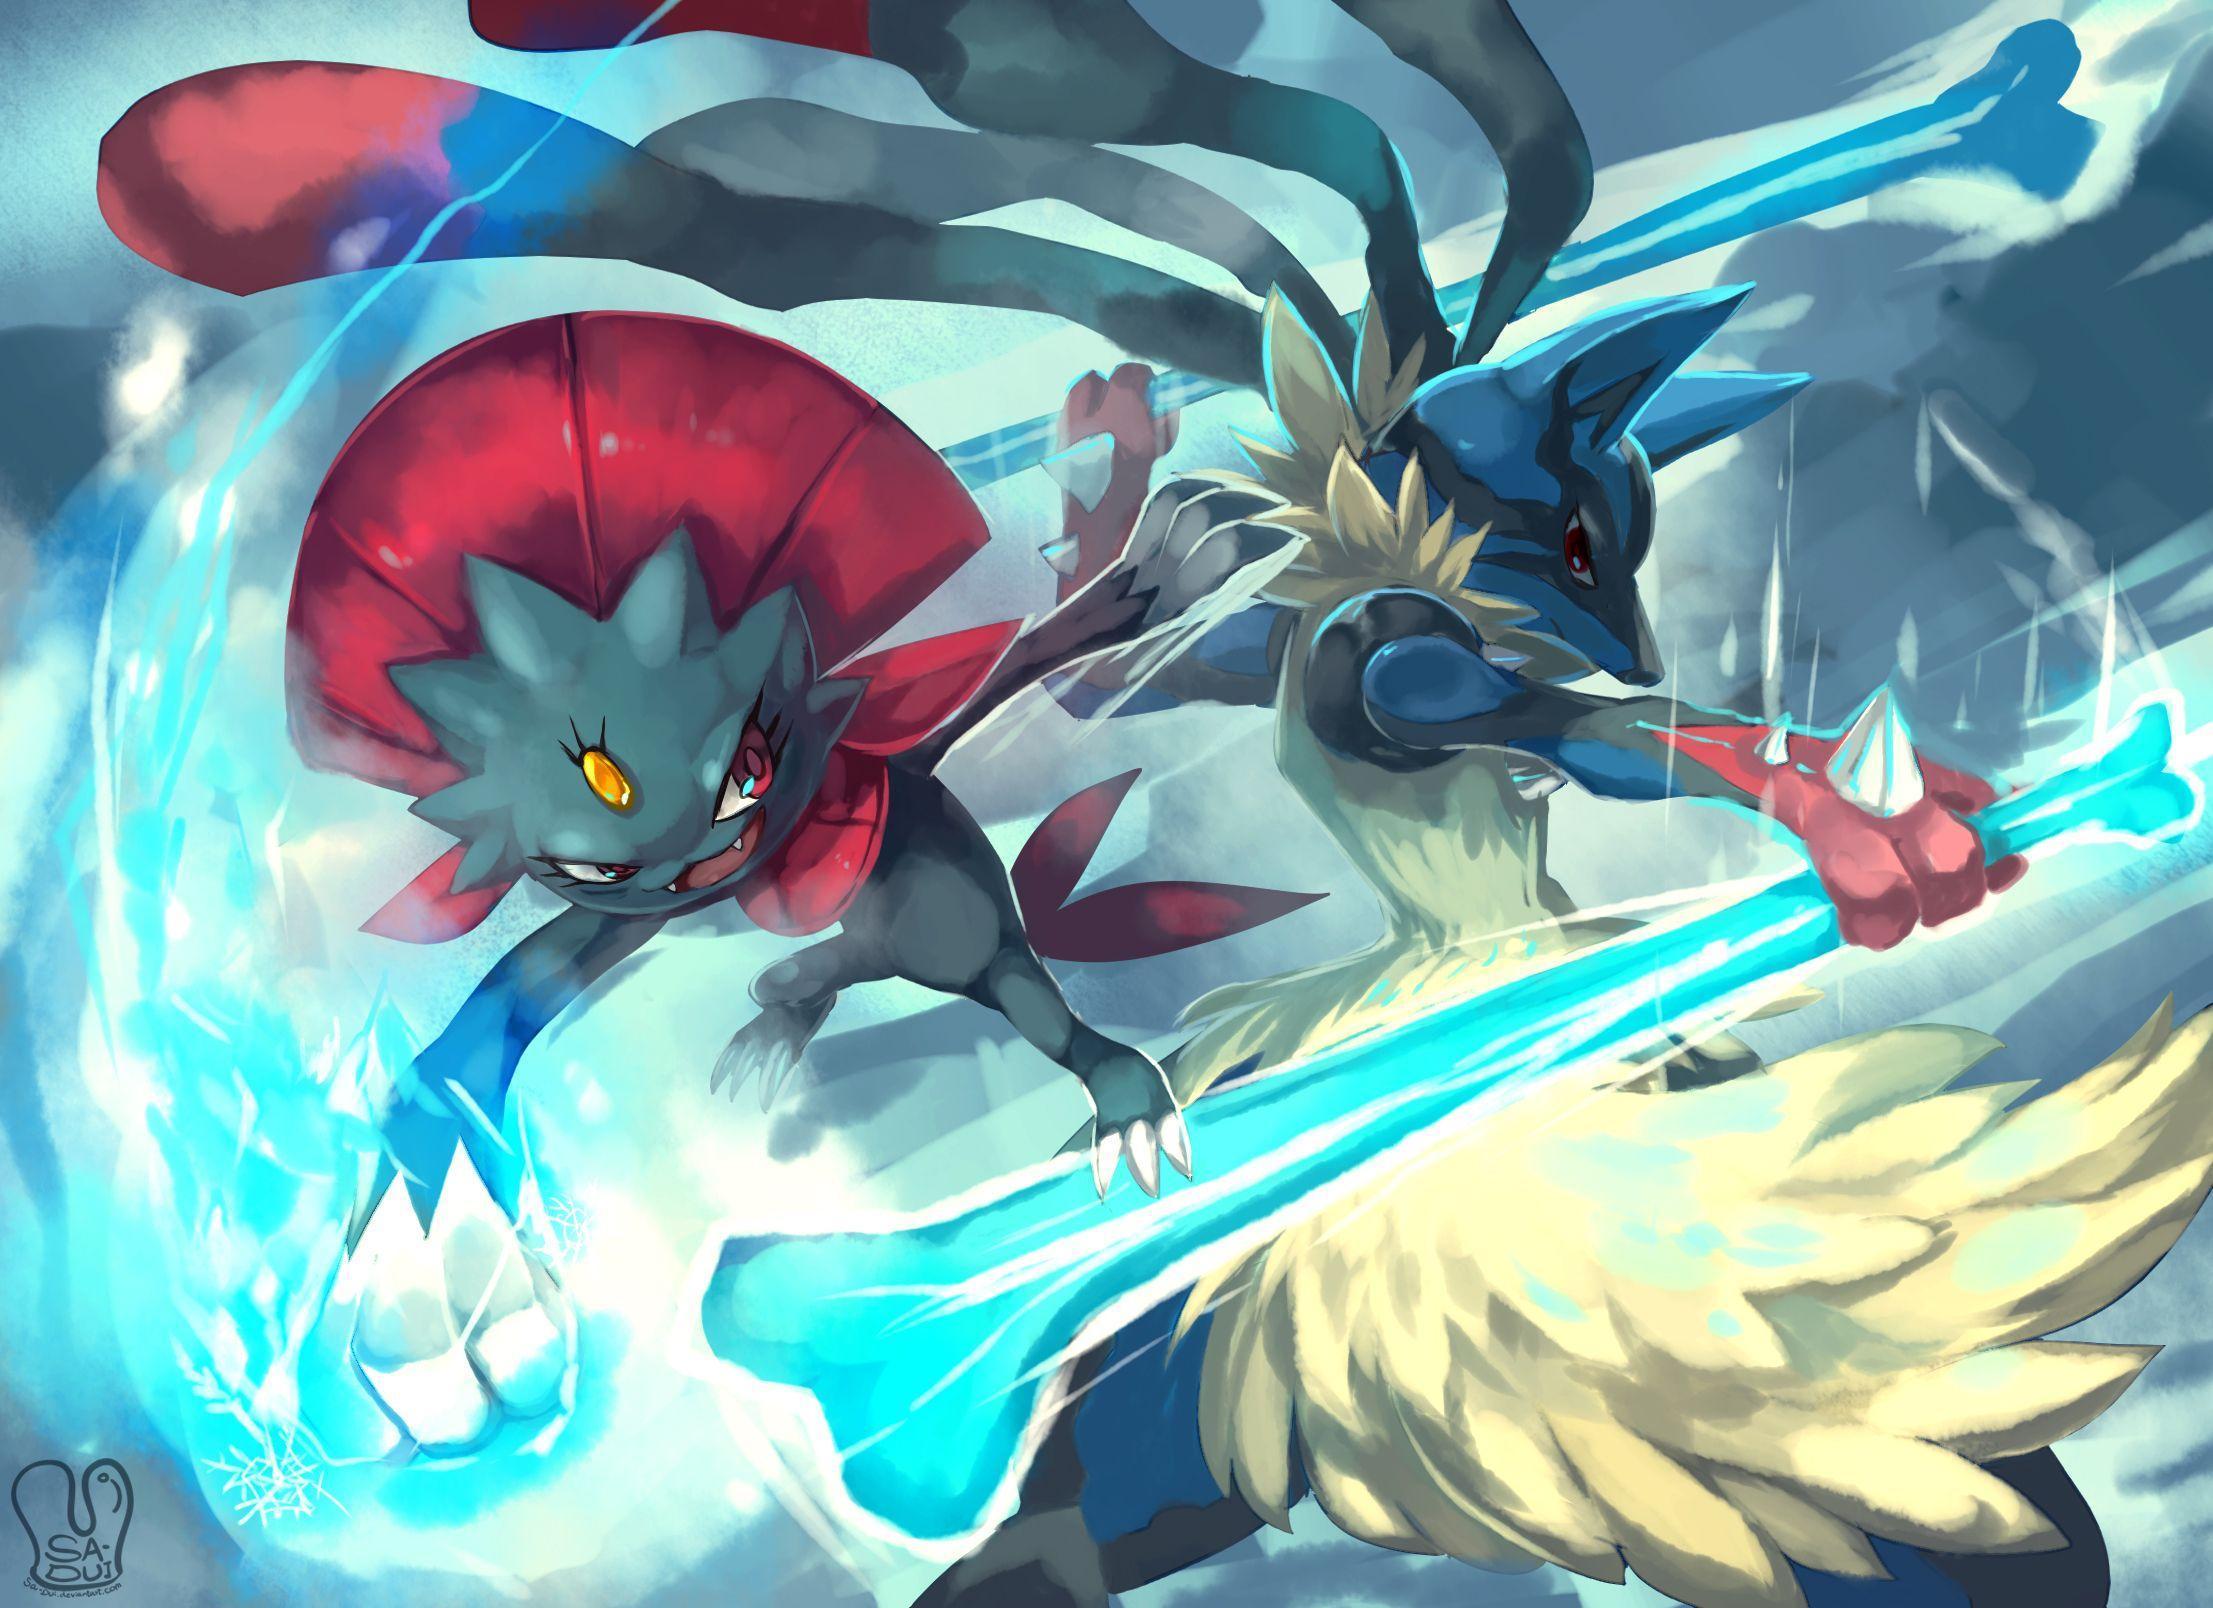 Mega Lucario VS Weavile Full HD Wallpapers and Backgrounds Image.